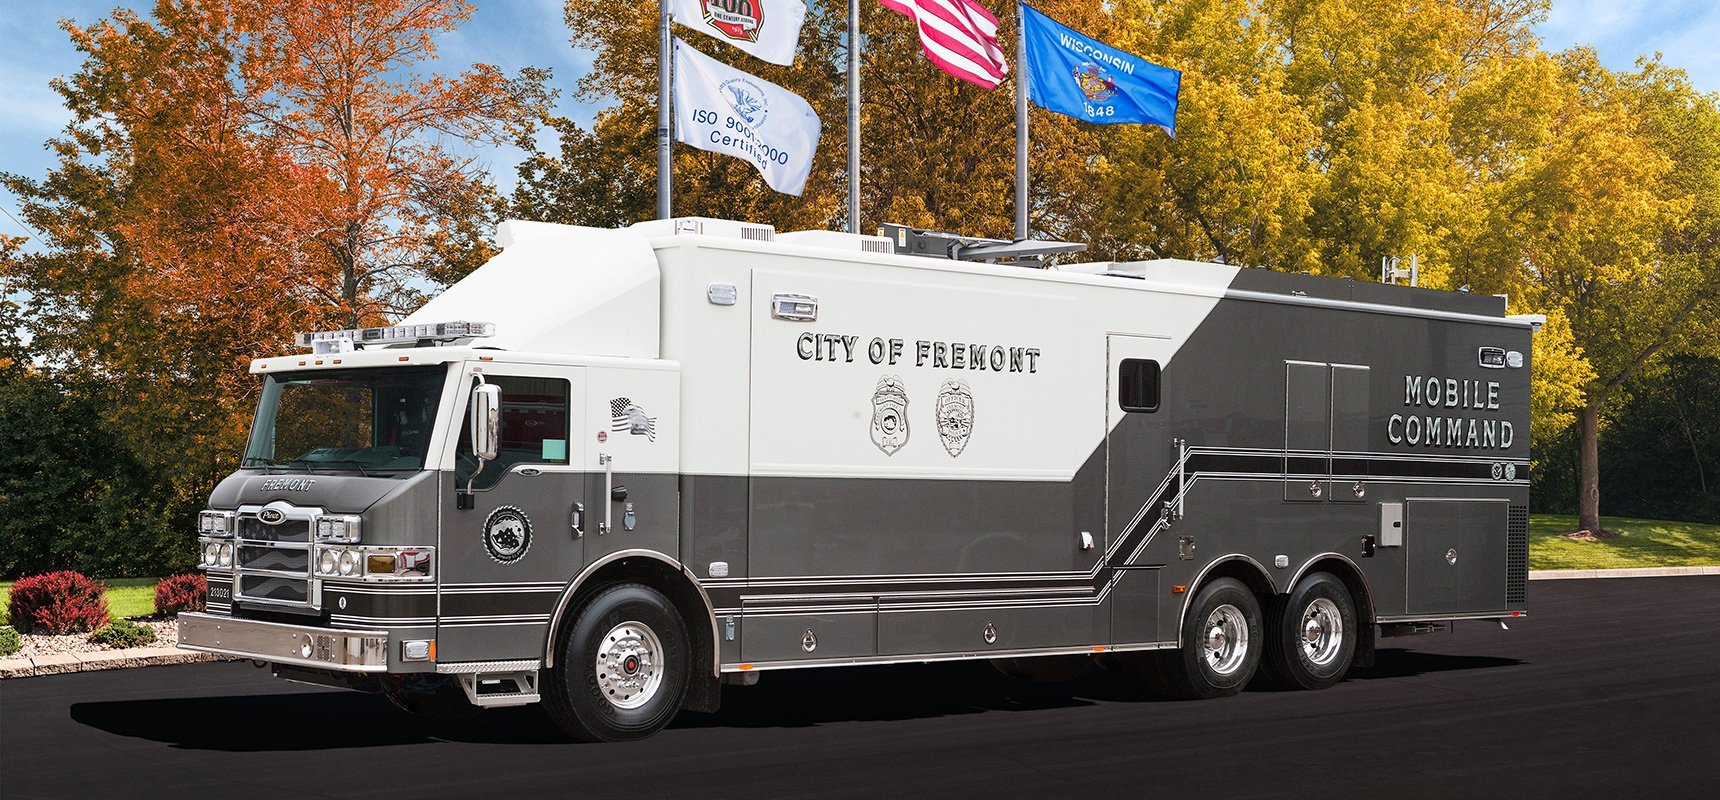 Pierce-Mobile-Command-Vehicle-Takes-On-Wide-Range-Of-Response-Challenges-In-Fremont,-CA_Header.jpg